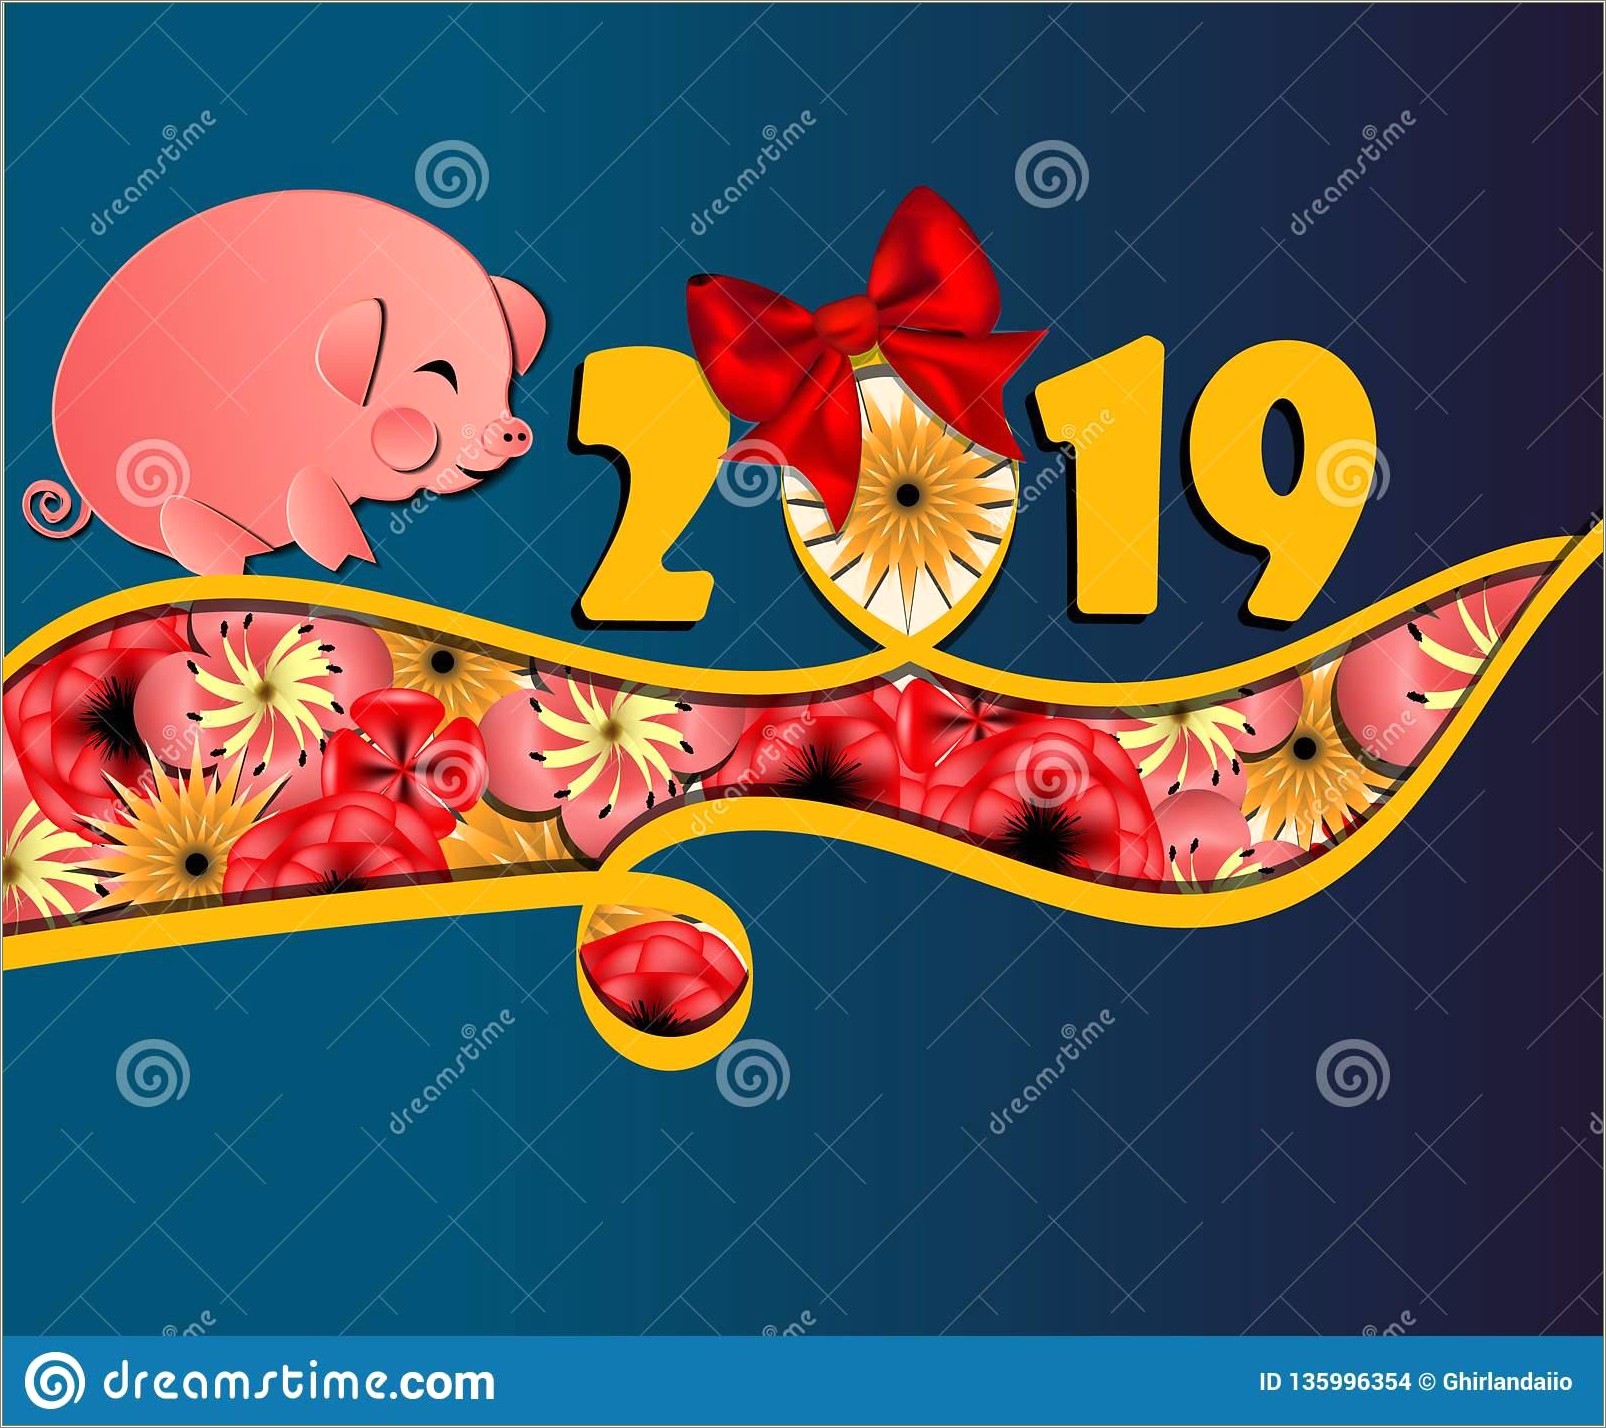 Chinese New Year 2019 Template Free